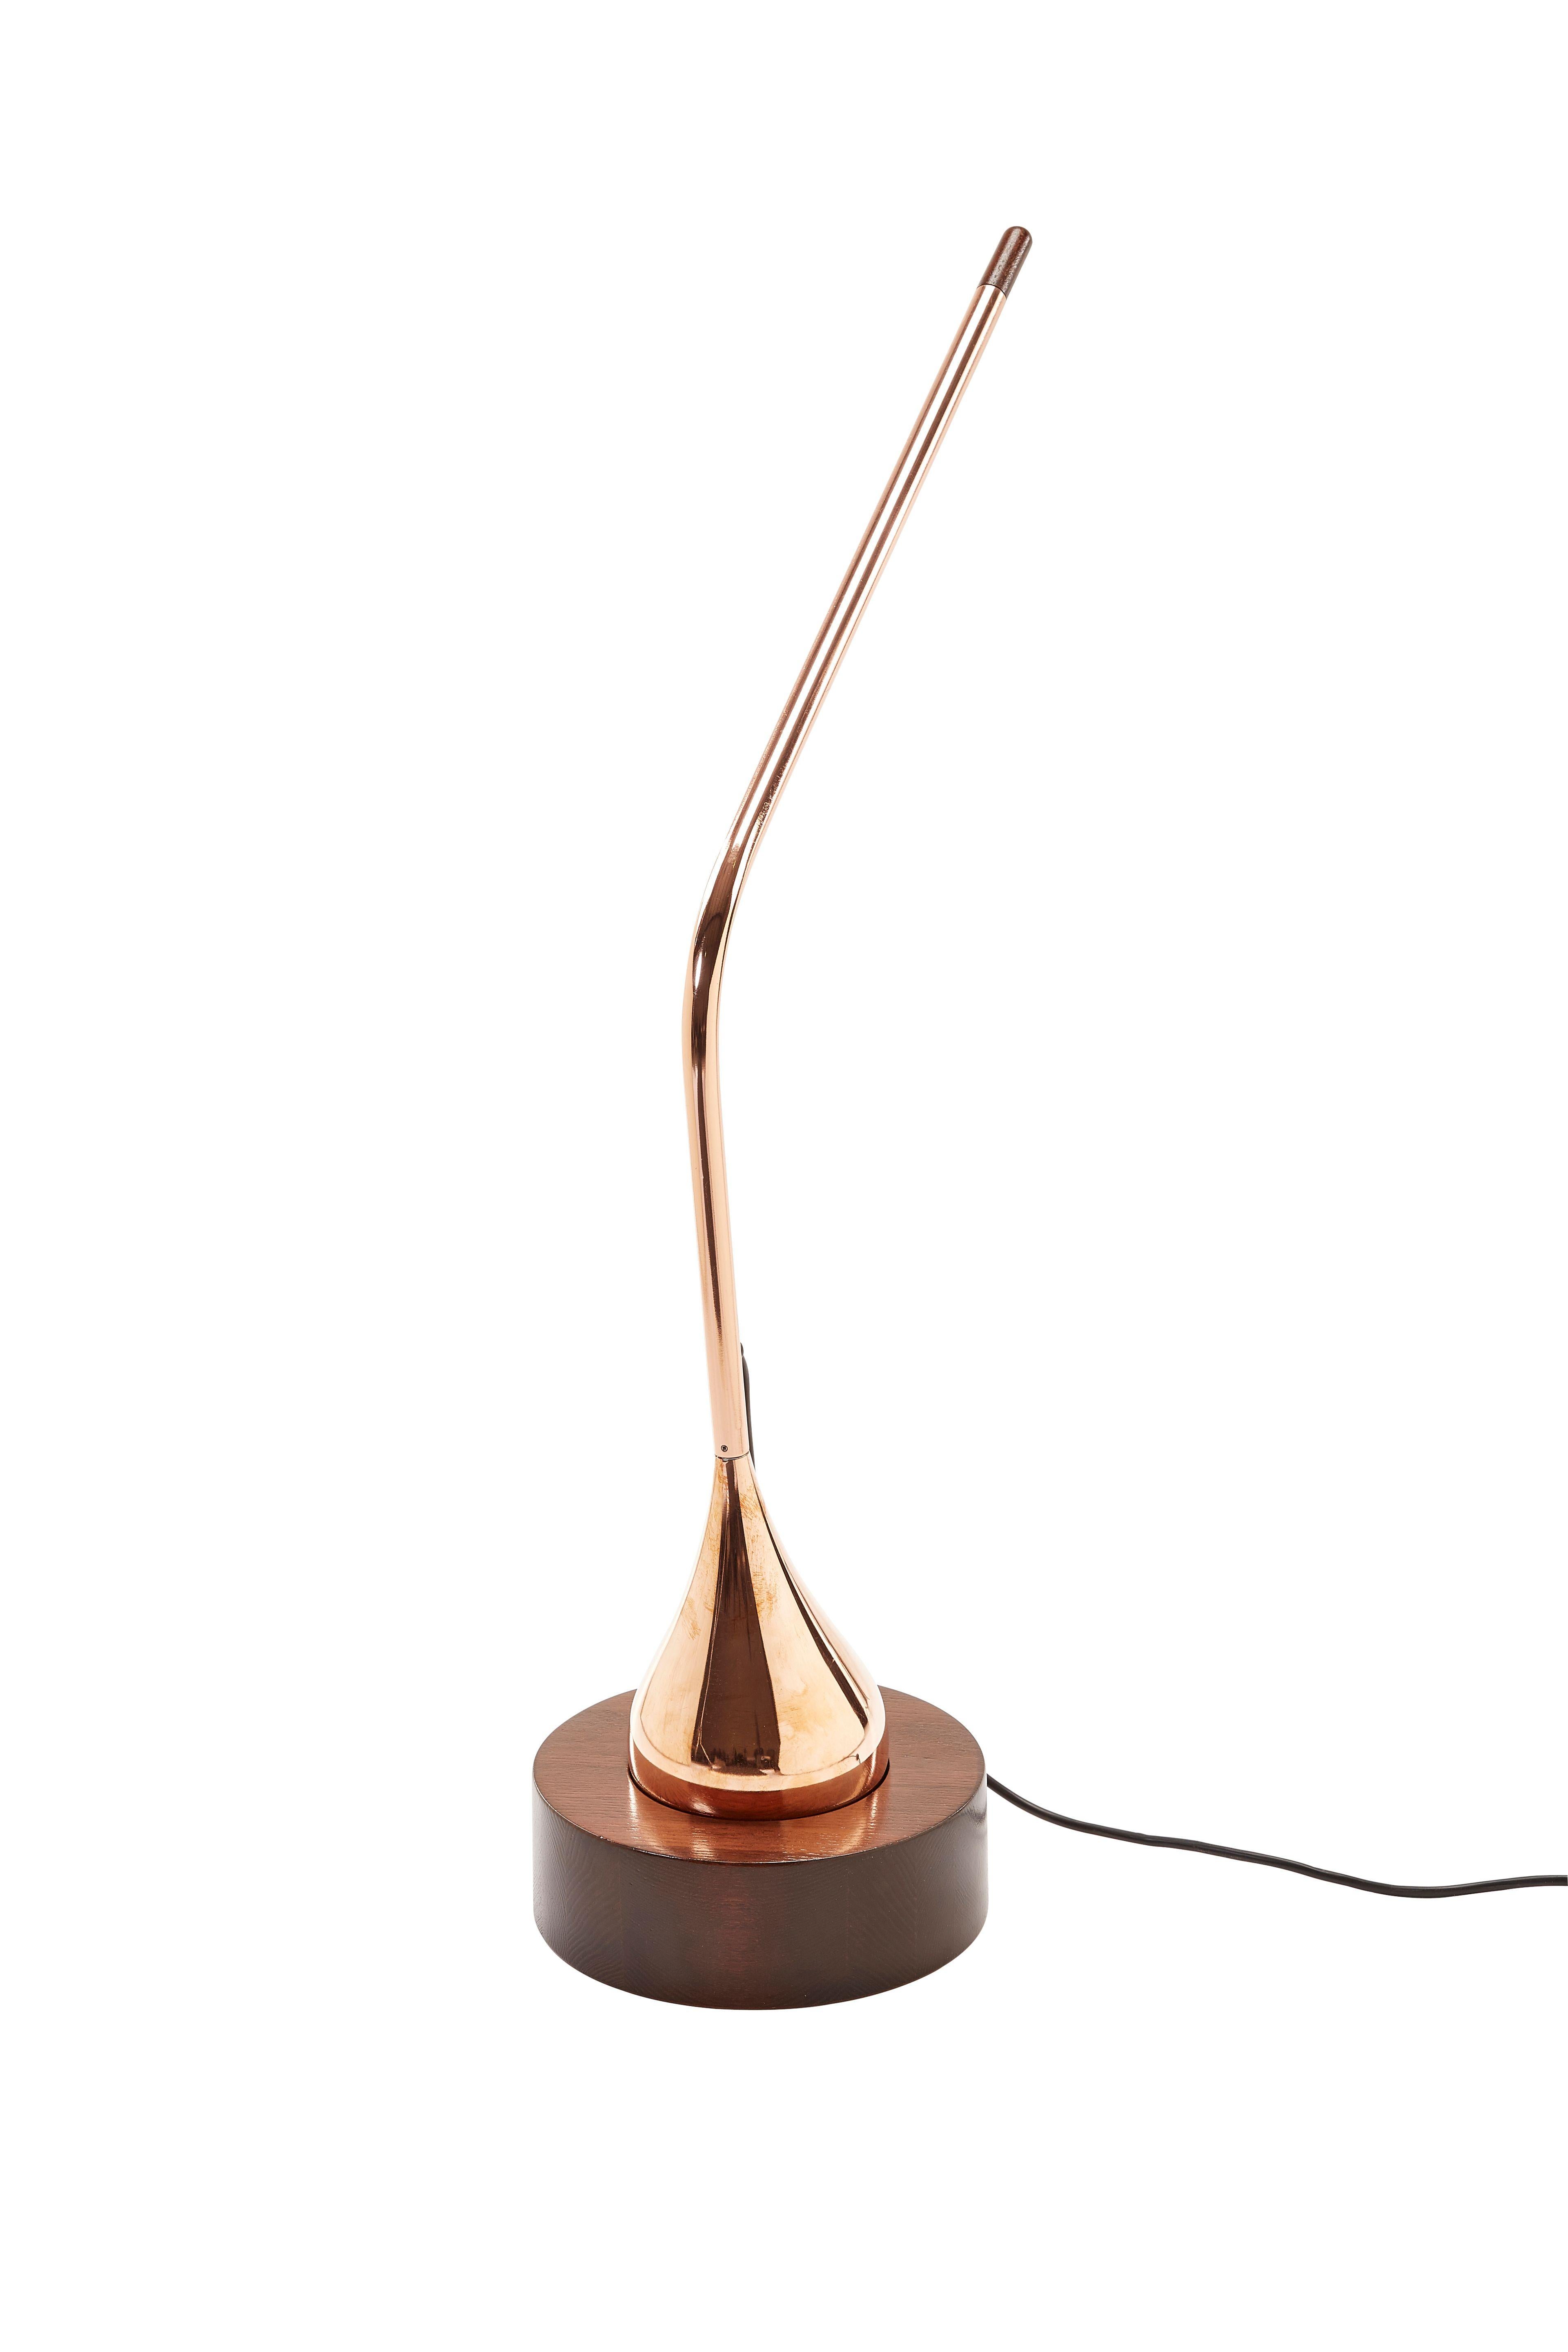 Contemporary Mortar & Pestle Table Lamp by Egg Designs